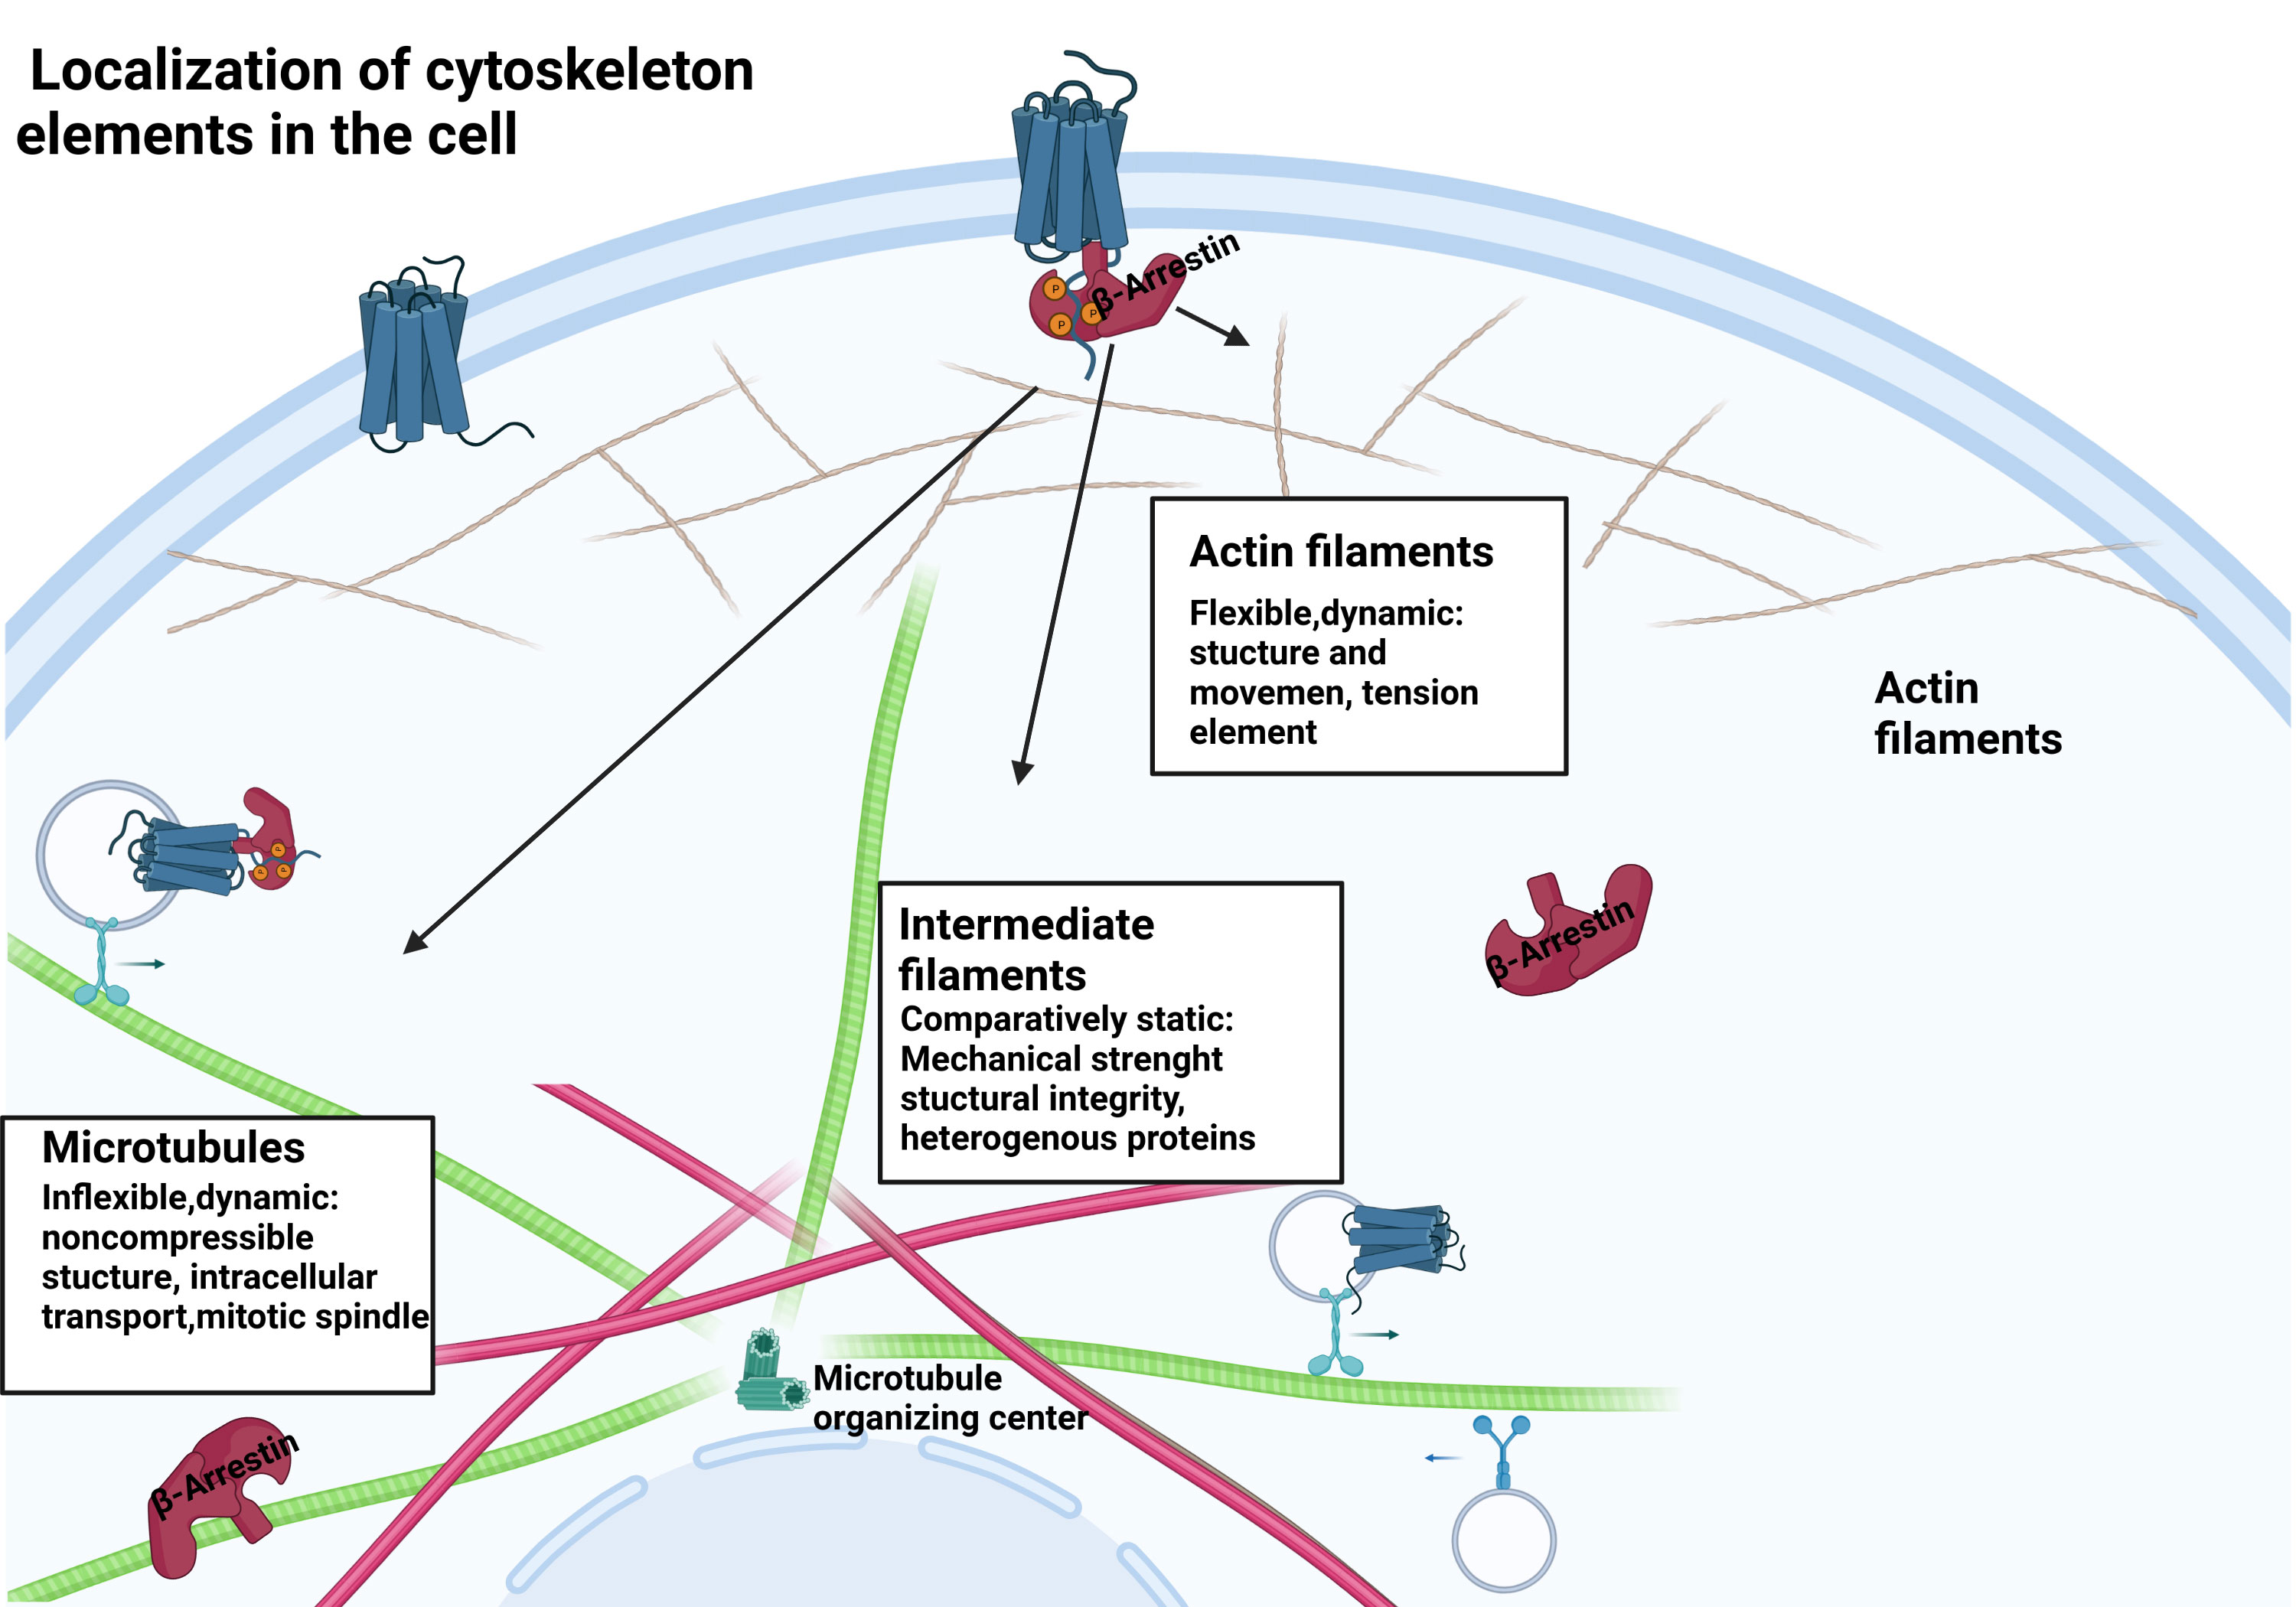 Xxx Ranjan Kumari - Frontiers | Interactions between Î²-arrestin proteins and the cytoskeletal  system, and their relevance to neurodegenerative disorders